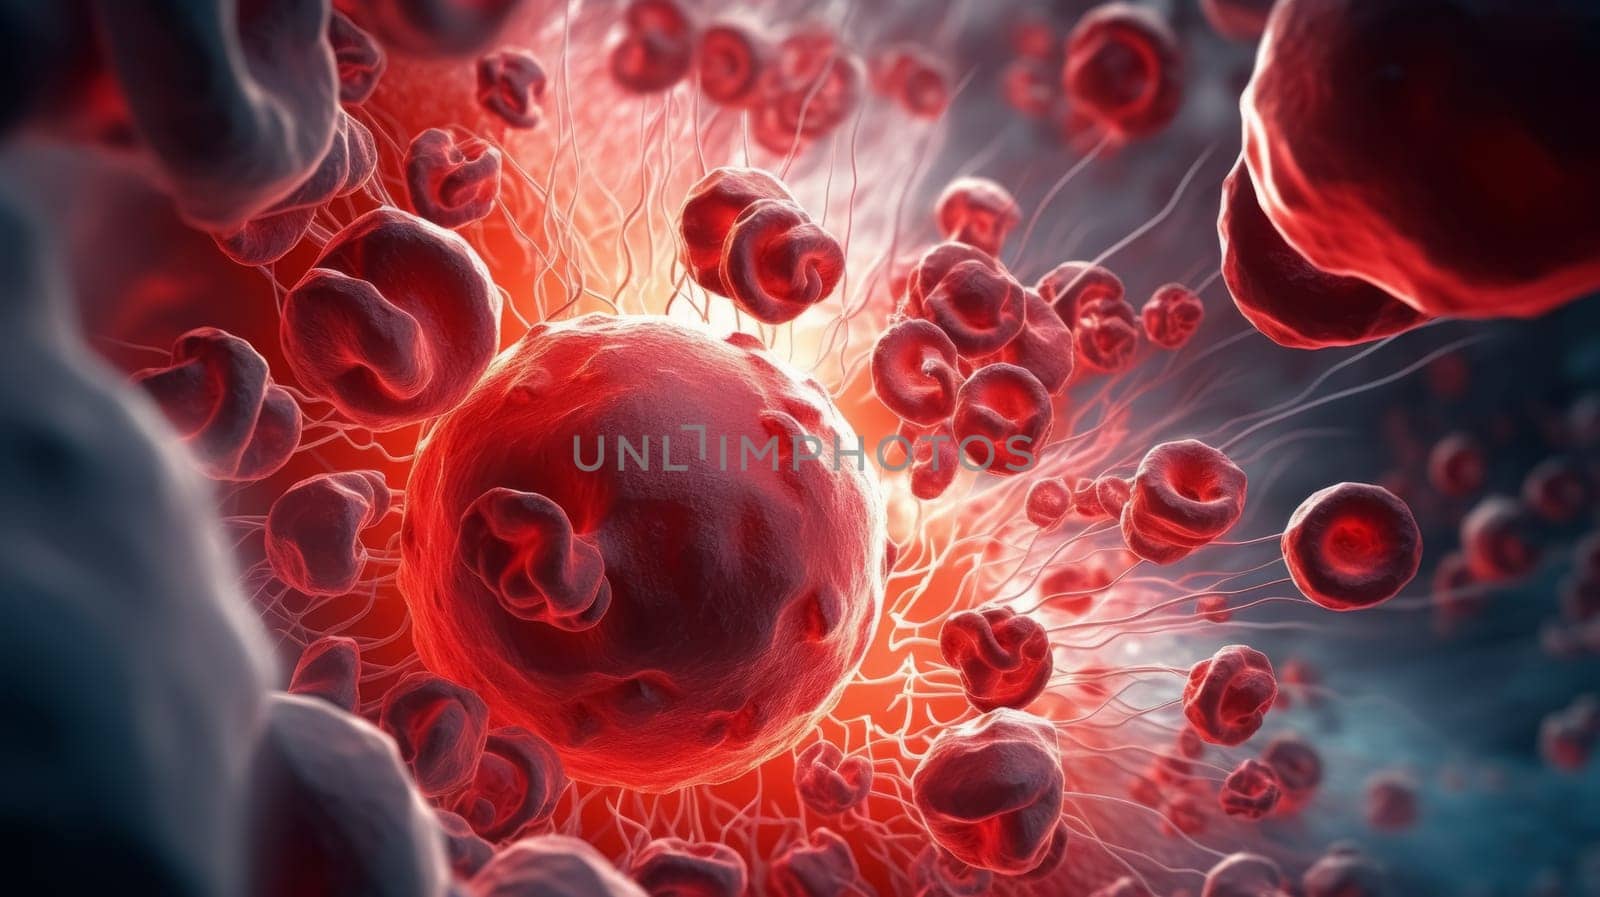 A detailed 3D illustration depicting mutated red blood cells within a vein, representing the effects of radiation on human blood